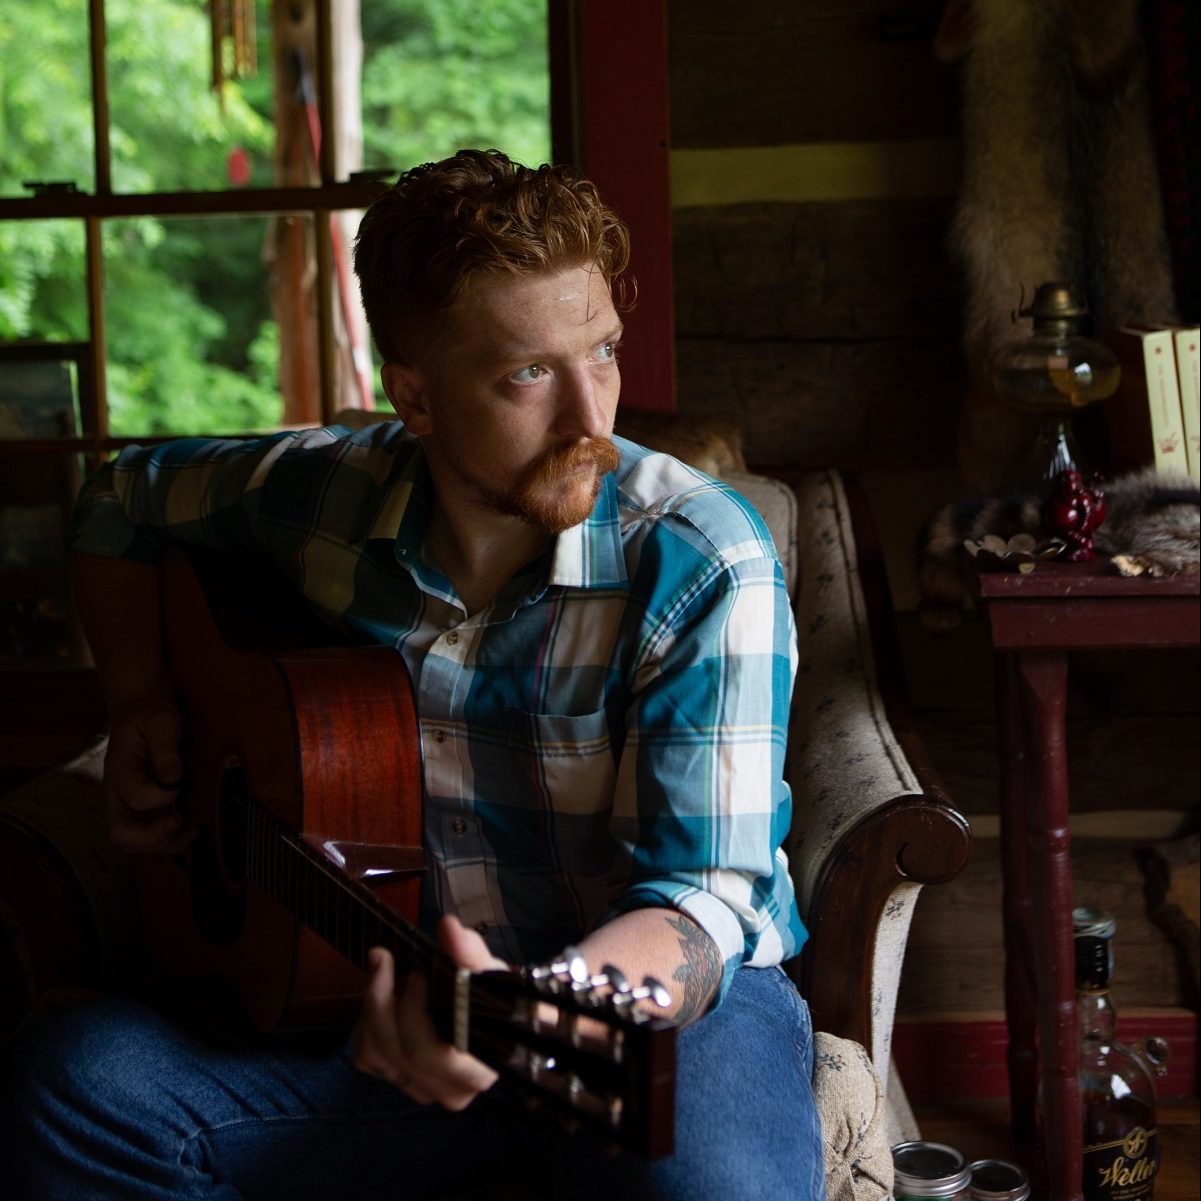 'Hard Luck Love Song': It's Americana Music, But as a Movie